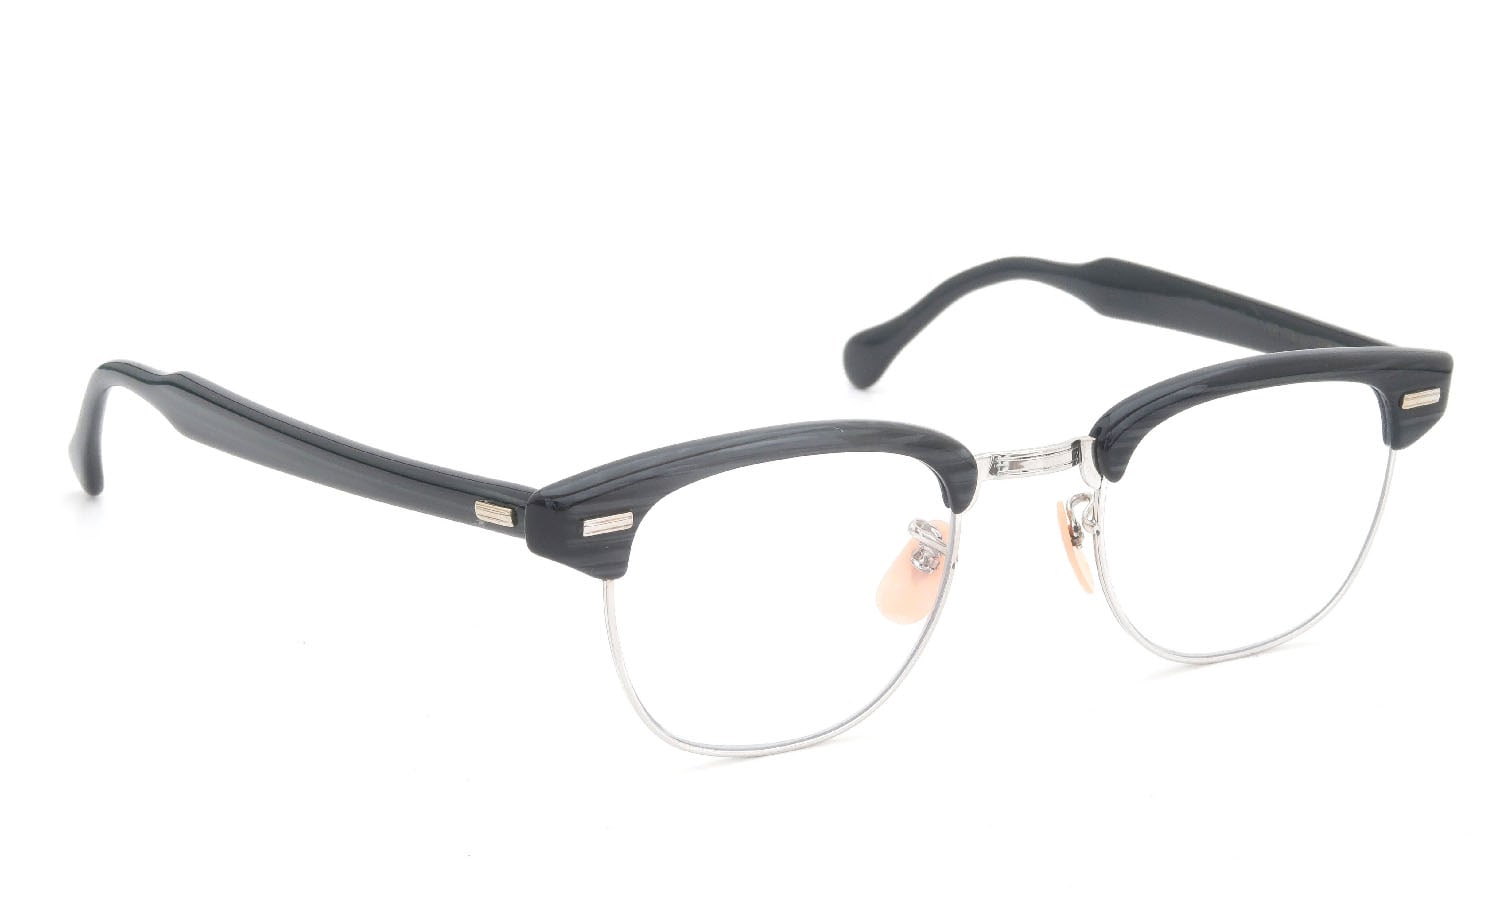 The Spectacle/ US Optical vintage ヴィンテージ メガネ通販 1950s